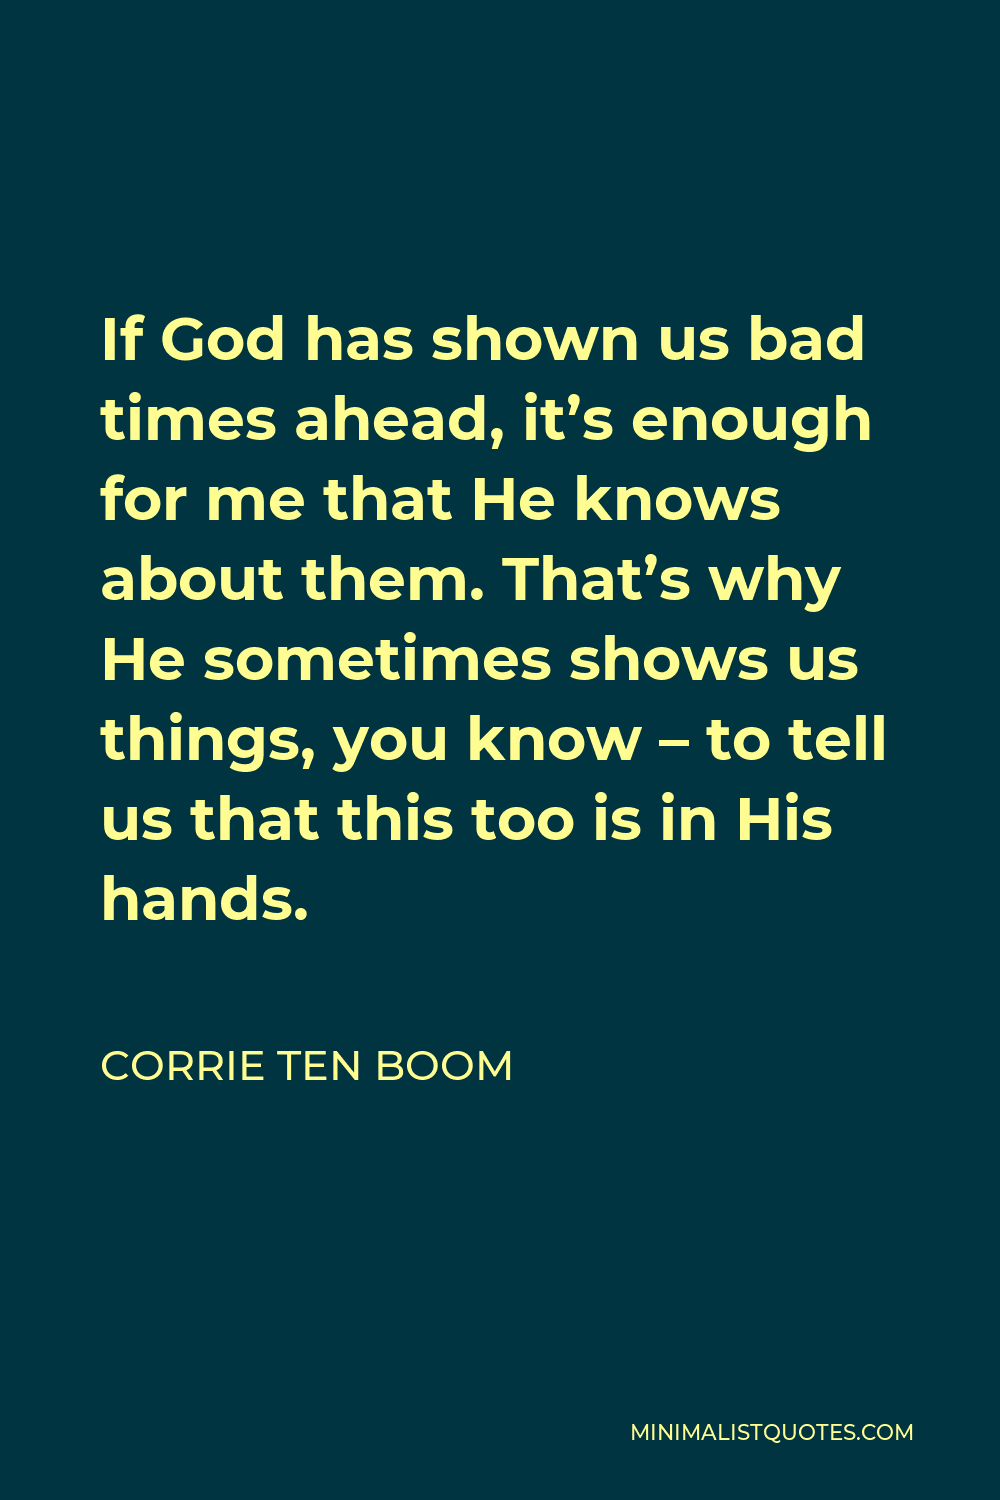 Corrie ten Boom Quote - If God has shown us bad times ahead, it’s enough for me that He knows about them. That’s why He sometimes shows us things, you know – to tell us that this too is in His hands.